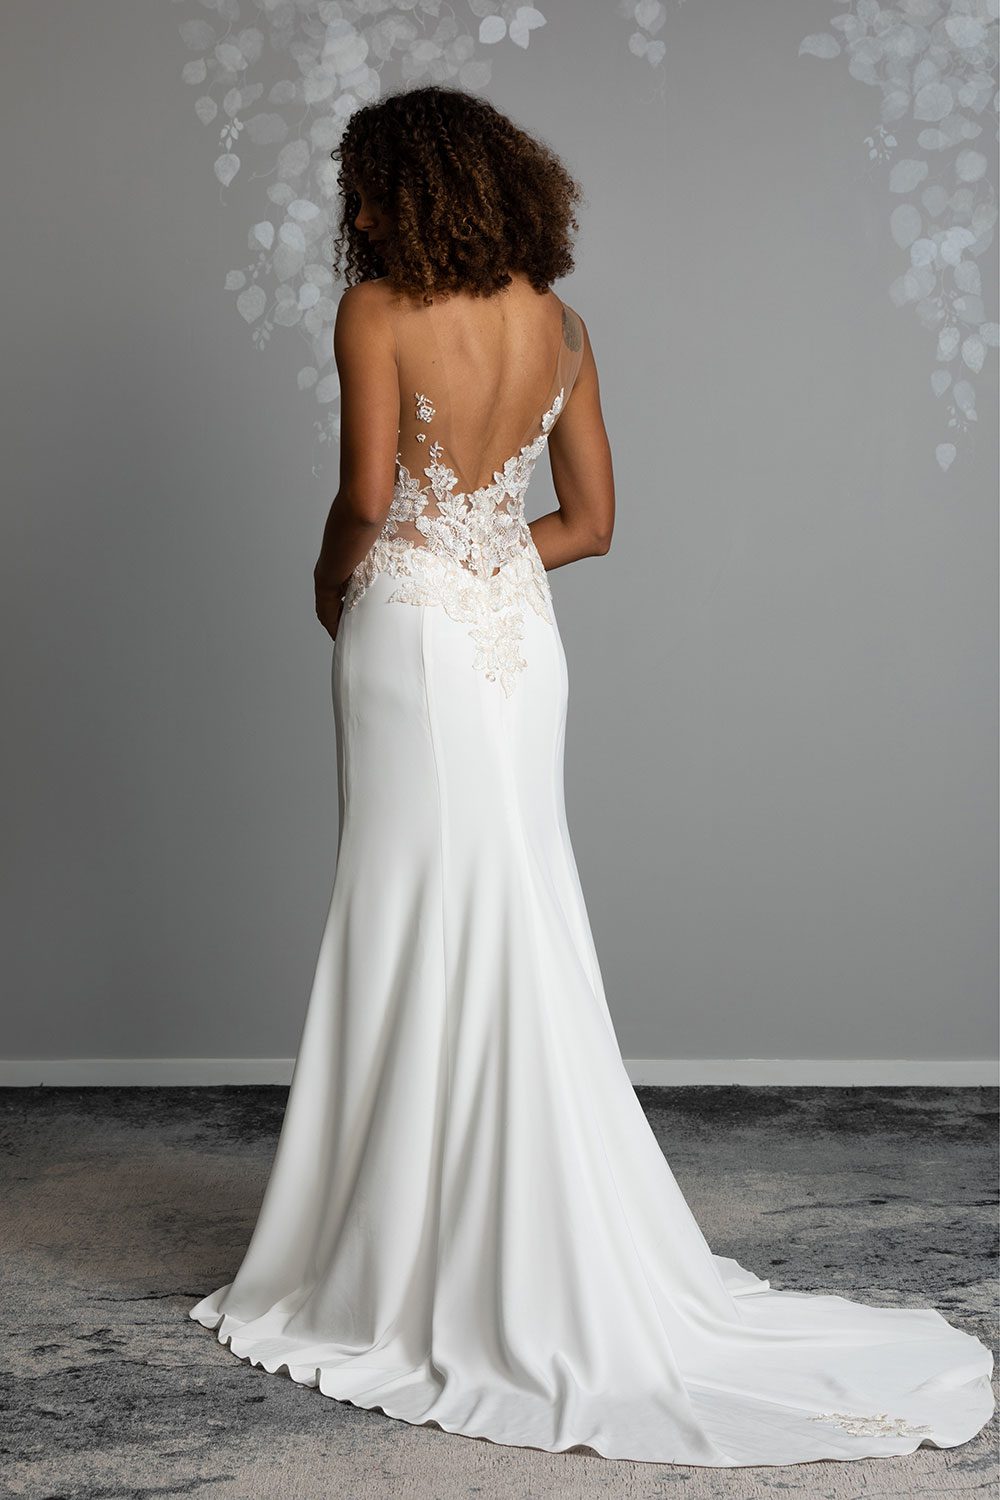 Samantha Wedding Dress from Vinka Design. This beautiful wedding dress has a nude sheer illusion strapless neckline made from fine Italian tulle. Low sheer back & structured bodice, & soft crepe train. Model showing full length back view of dress with low sheer back and bridal crepe train